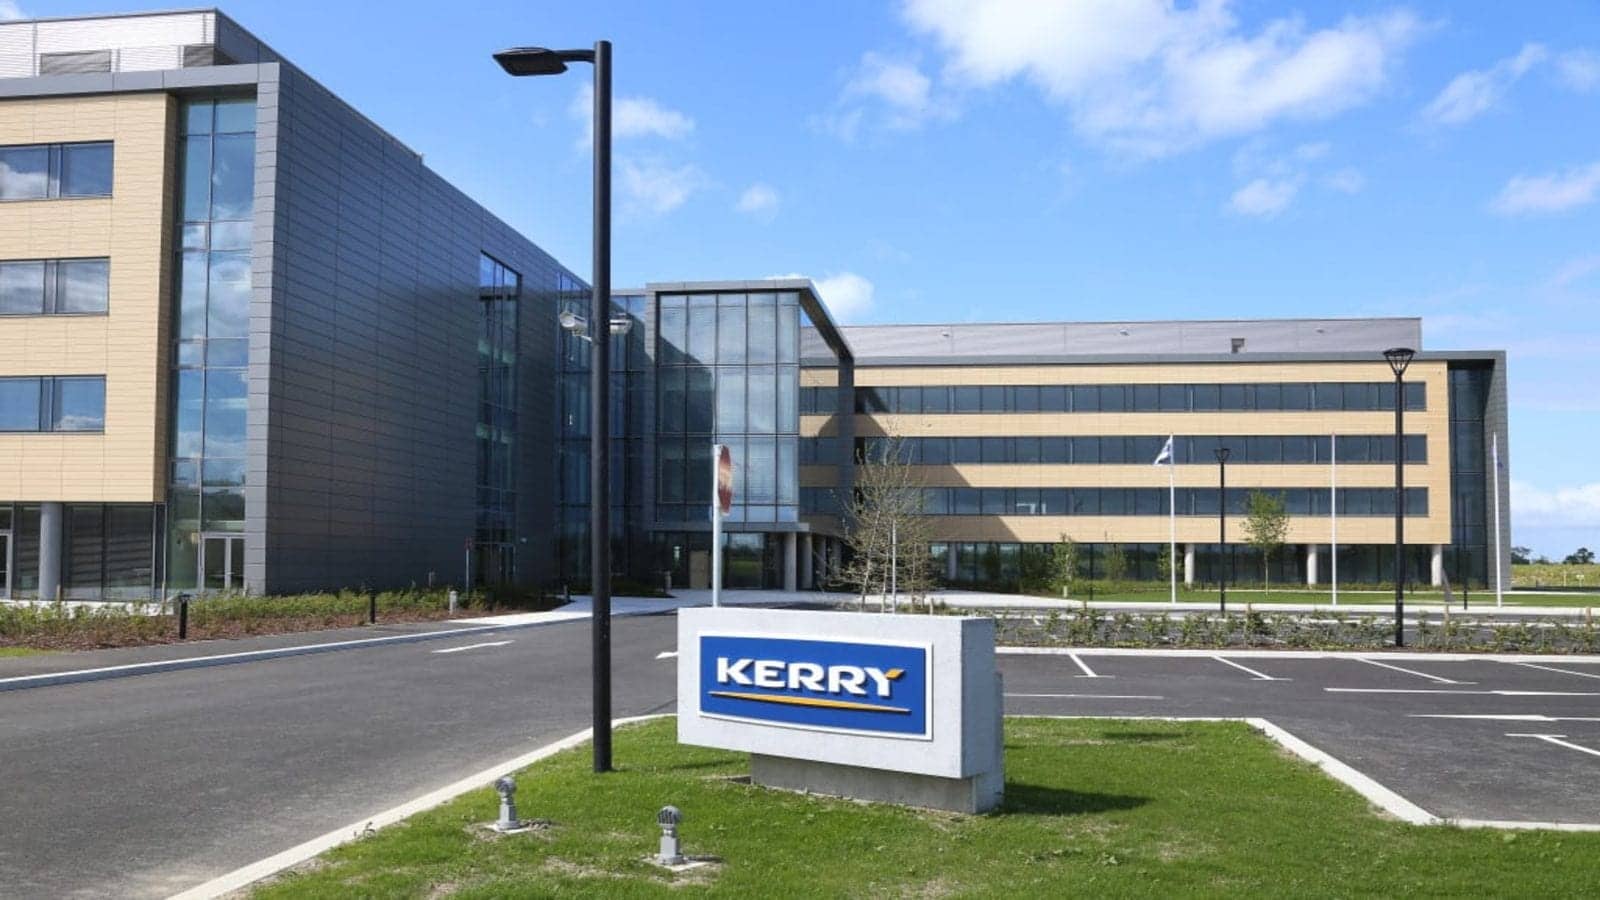 Taste and flavor expert Kerry makes two acquisitions to bolster biotech capabilities 